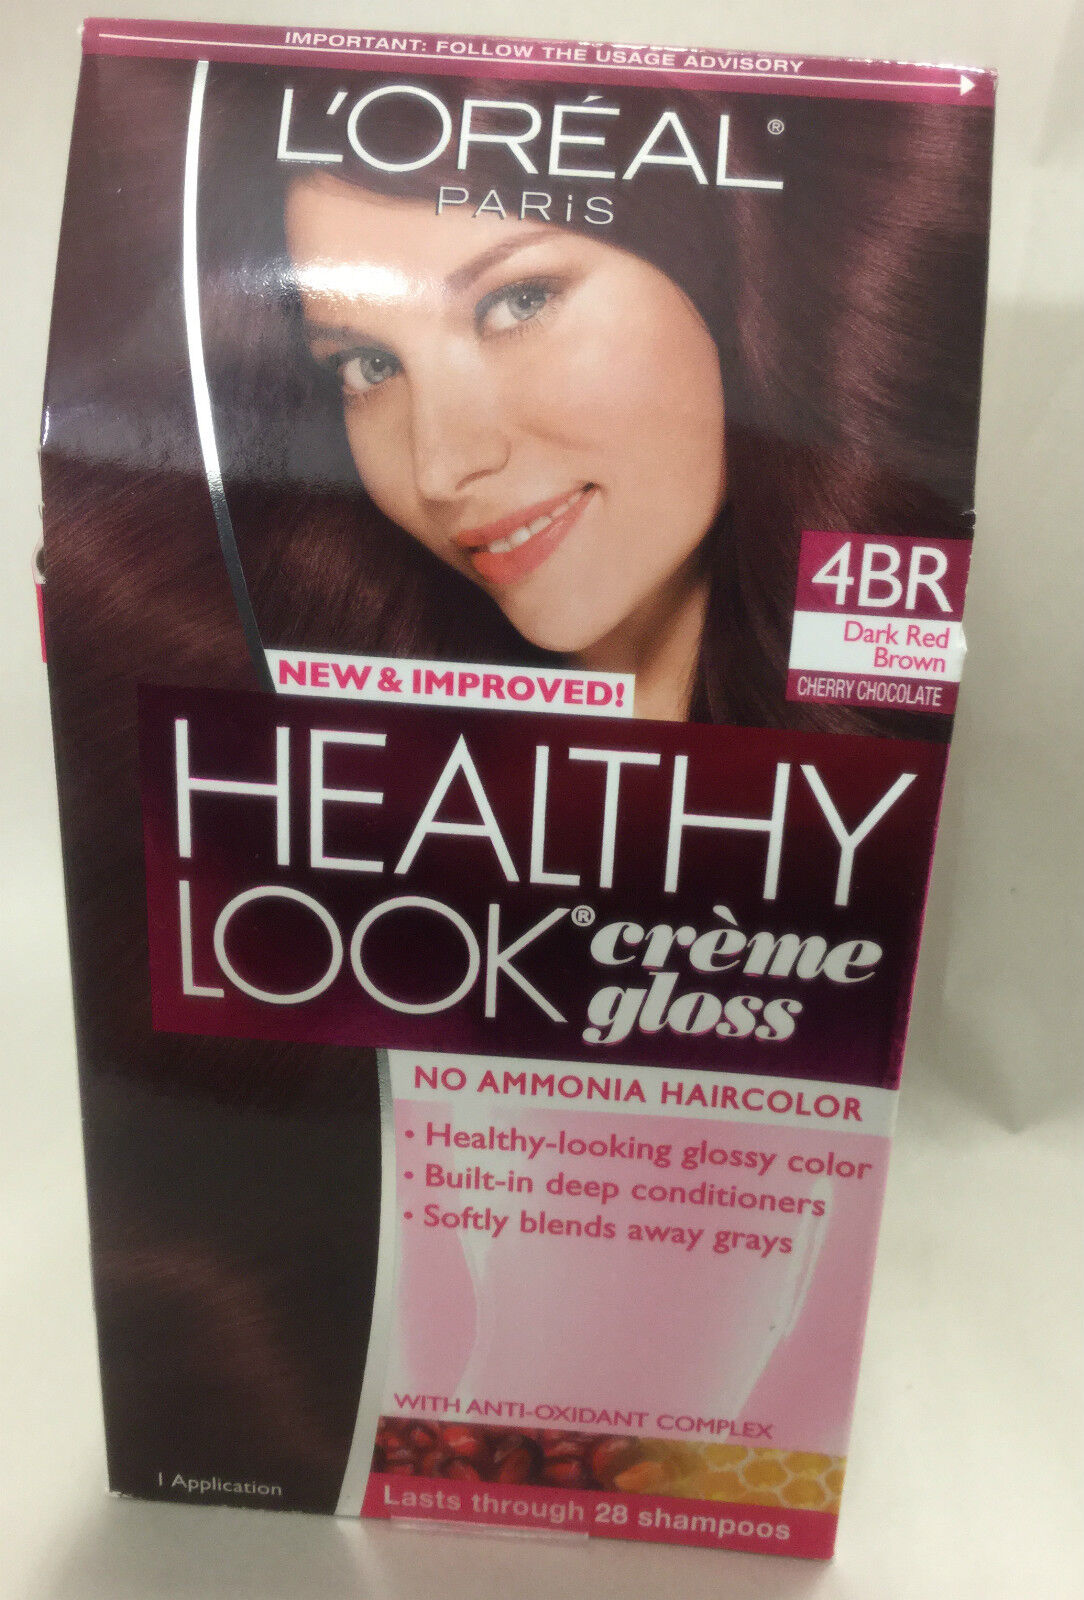 L'Oreal Healthy Look Creme Gloss Hair Color,Dark Red Brown 4BR/ CHERRY  CHOCOLATE | eBay